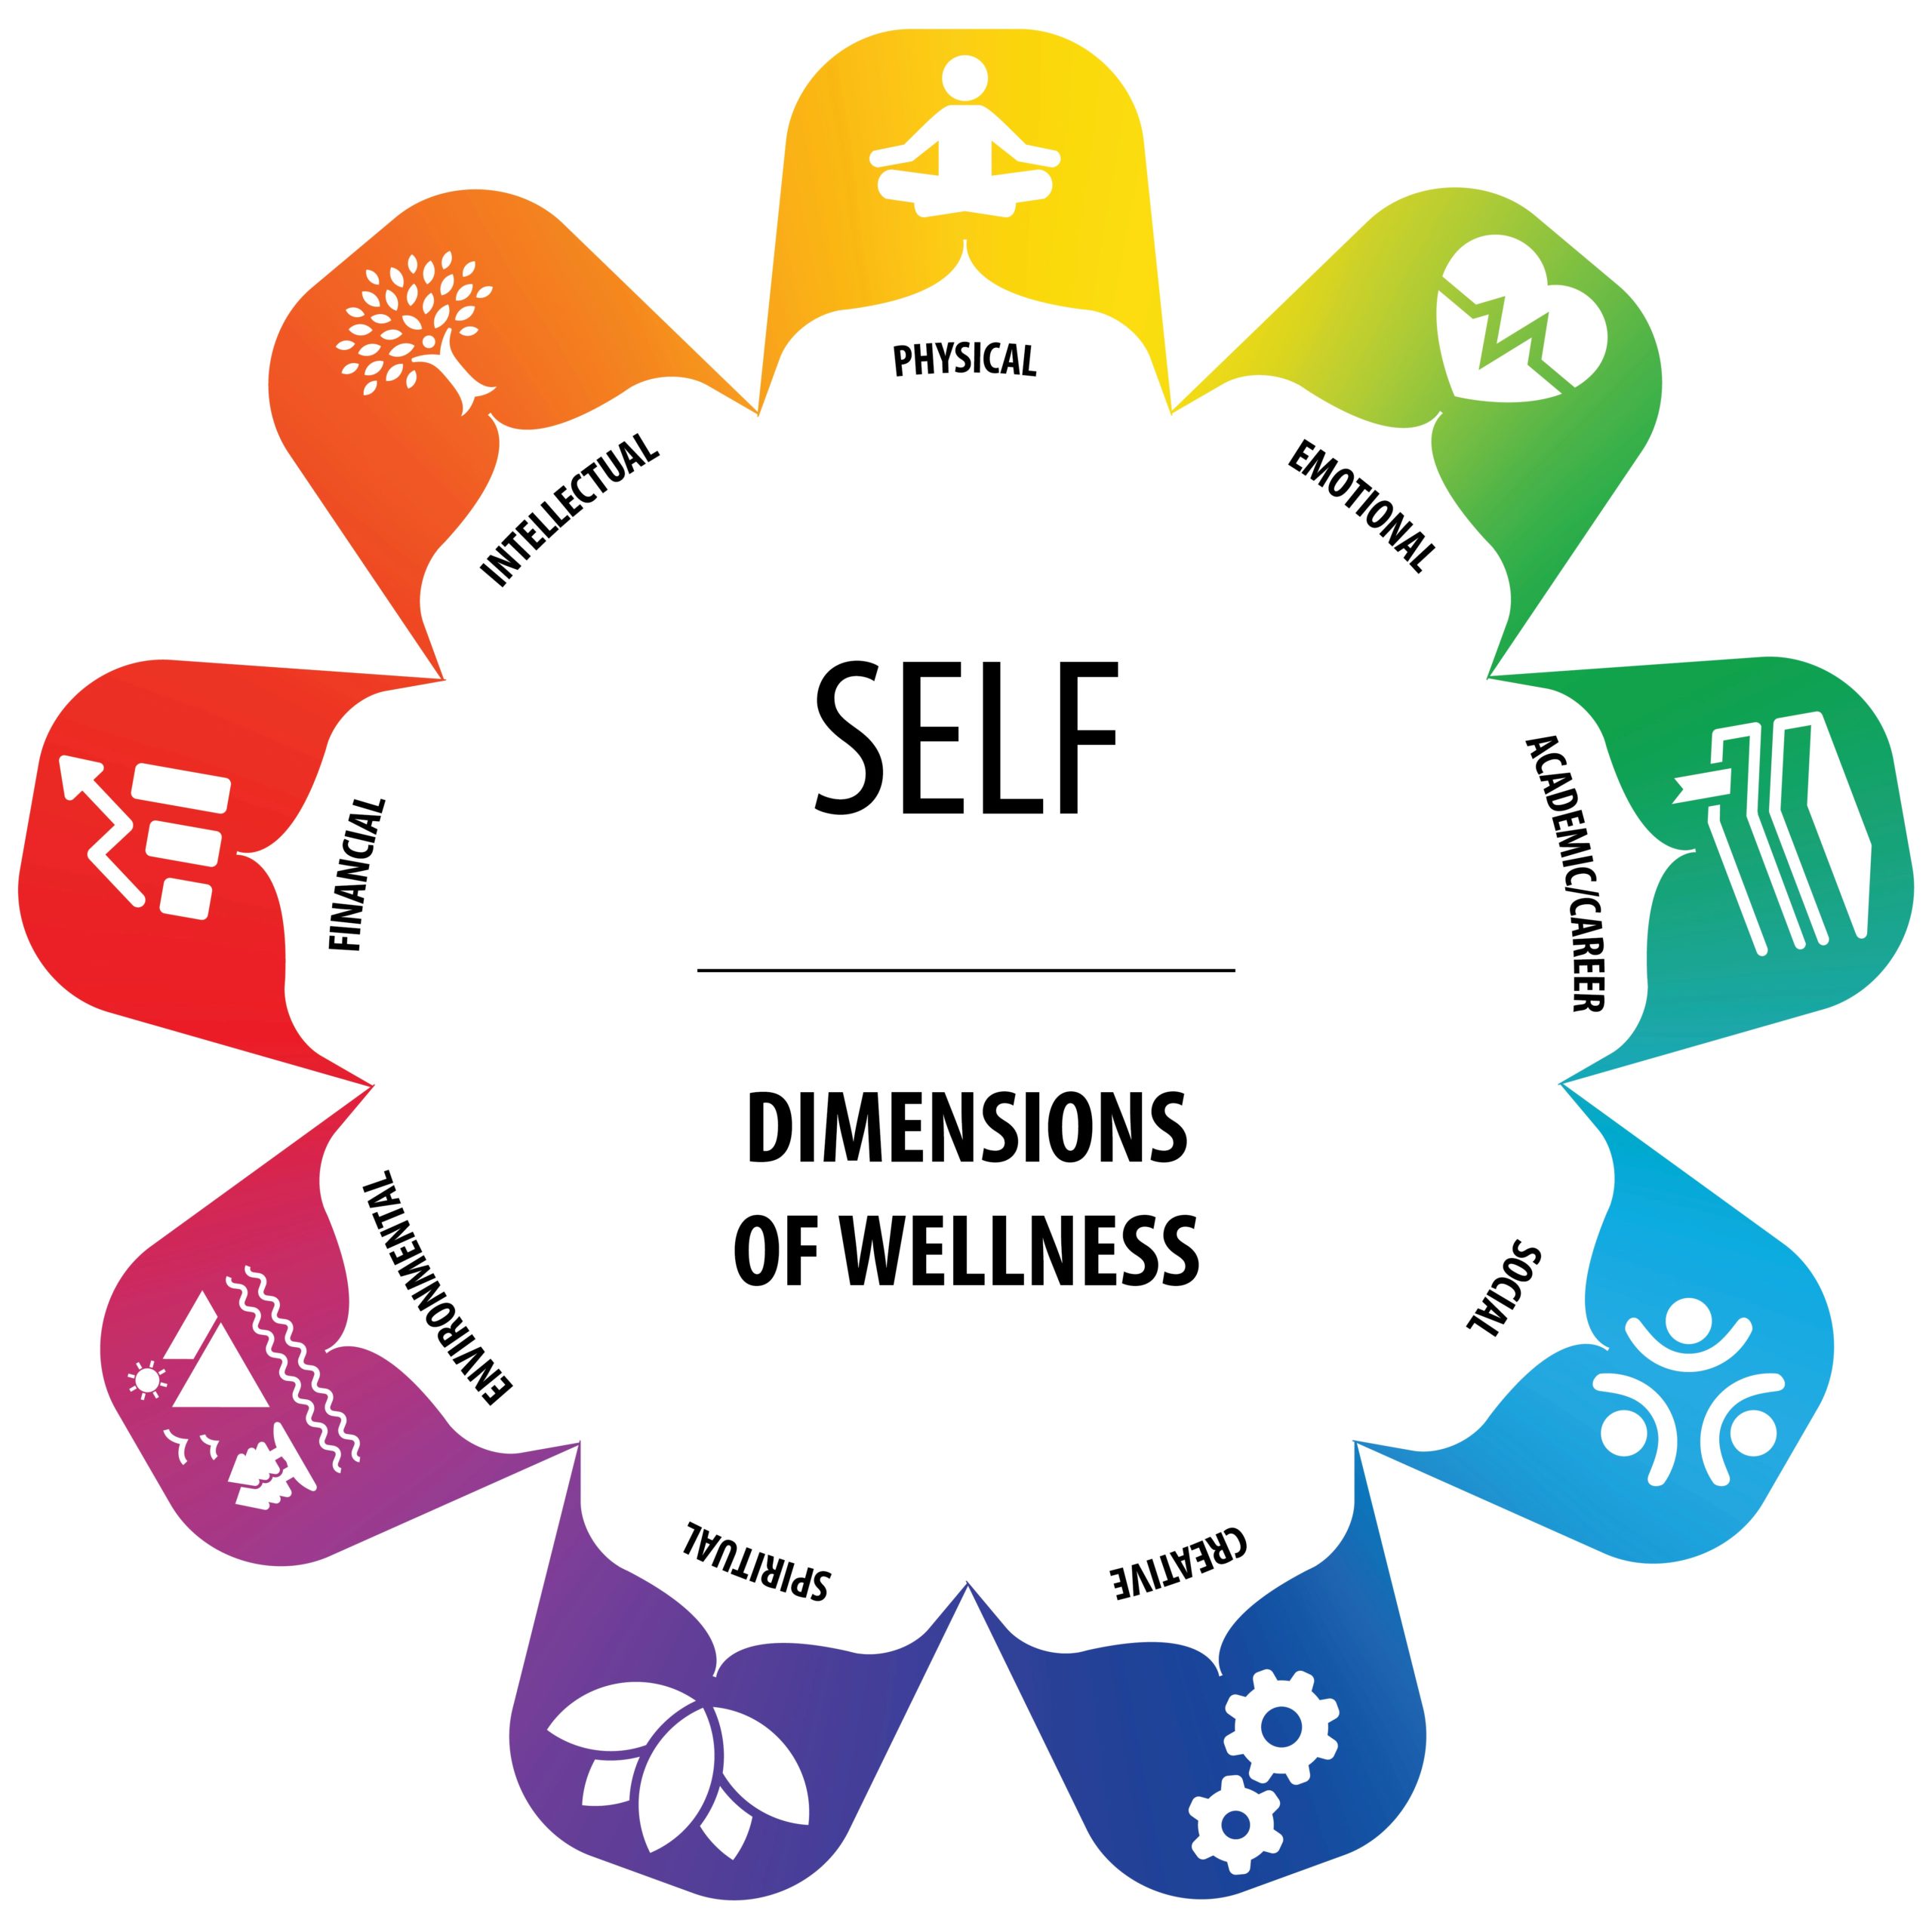 The 9 dimensions of self-wellness placed on the wellness wheel.